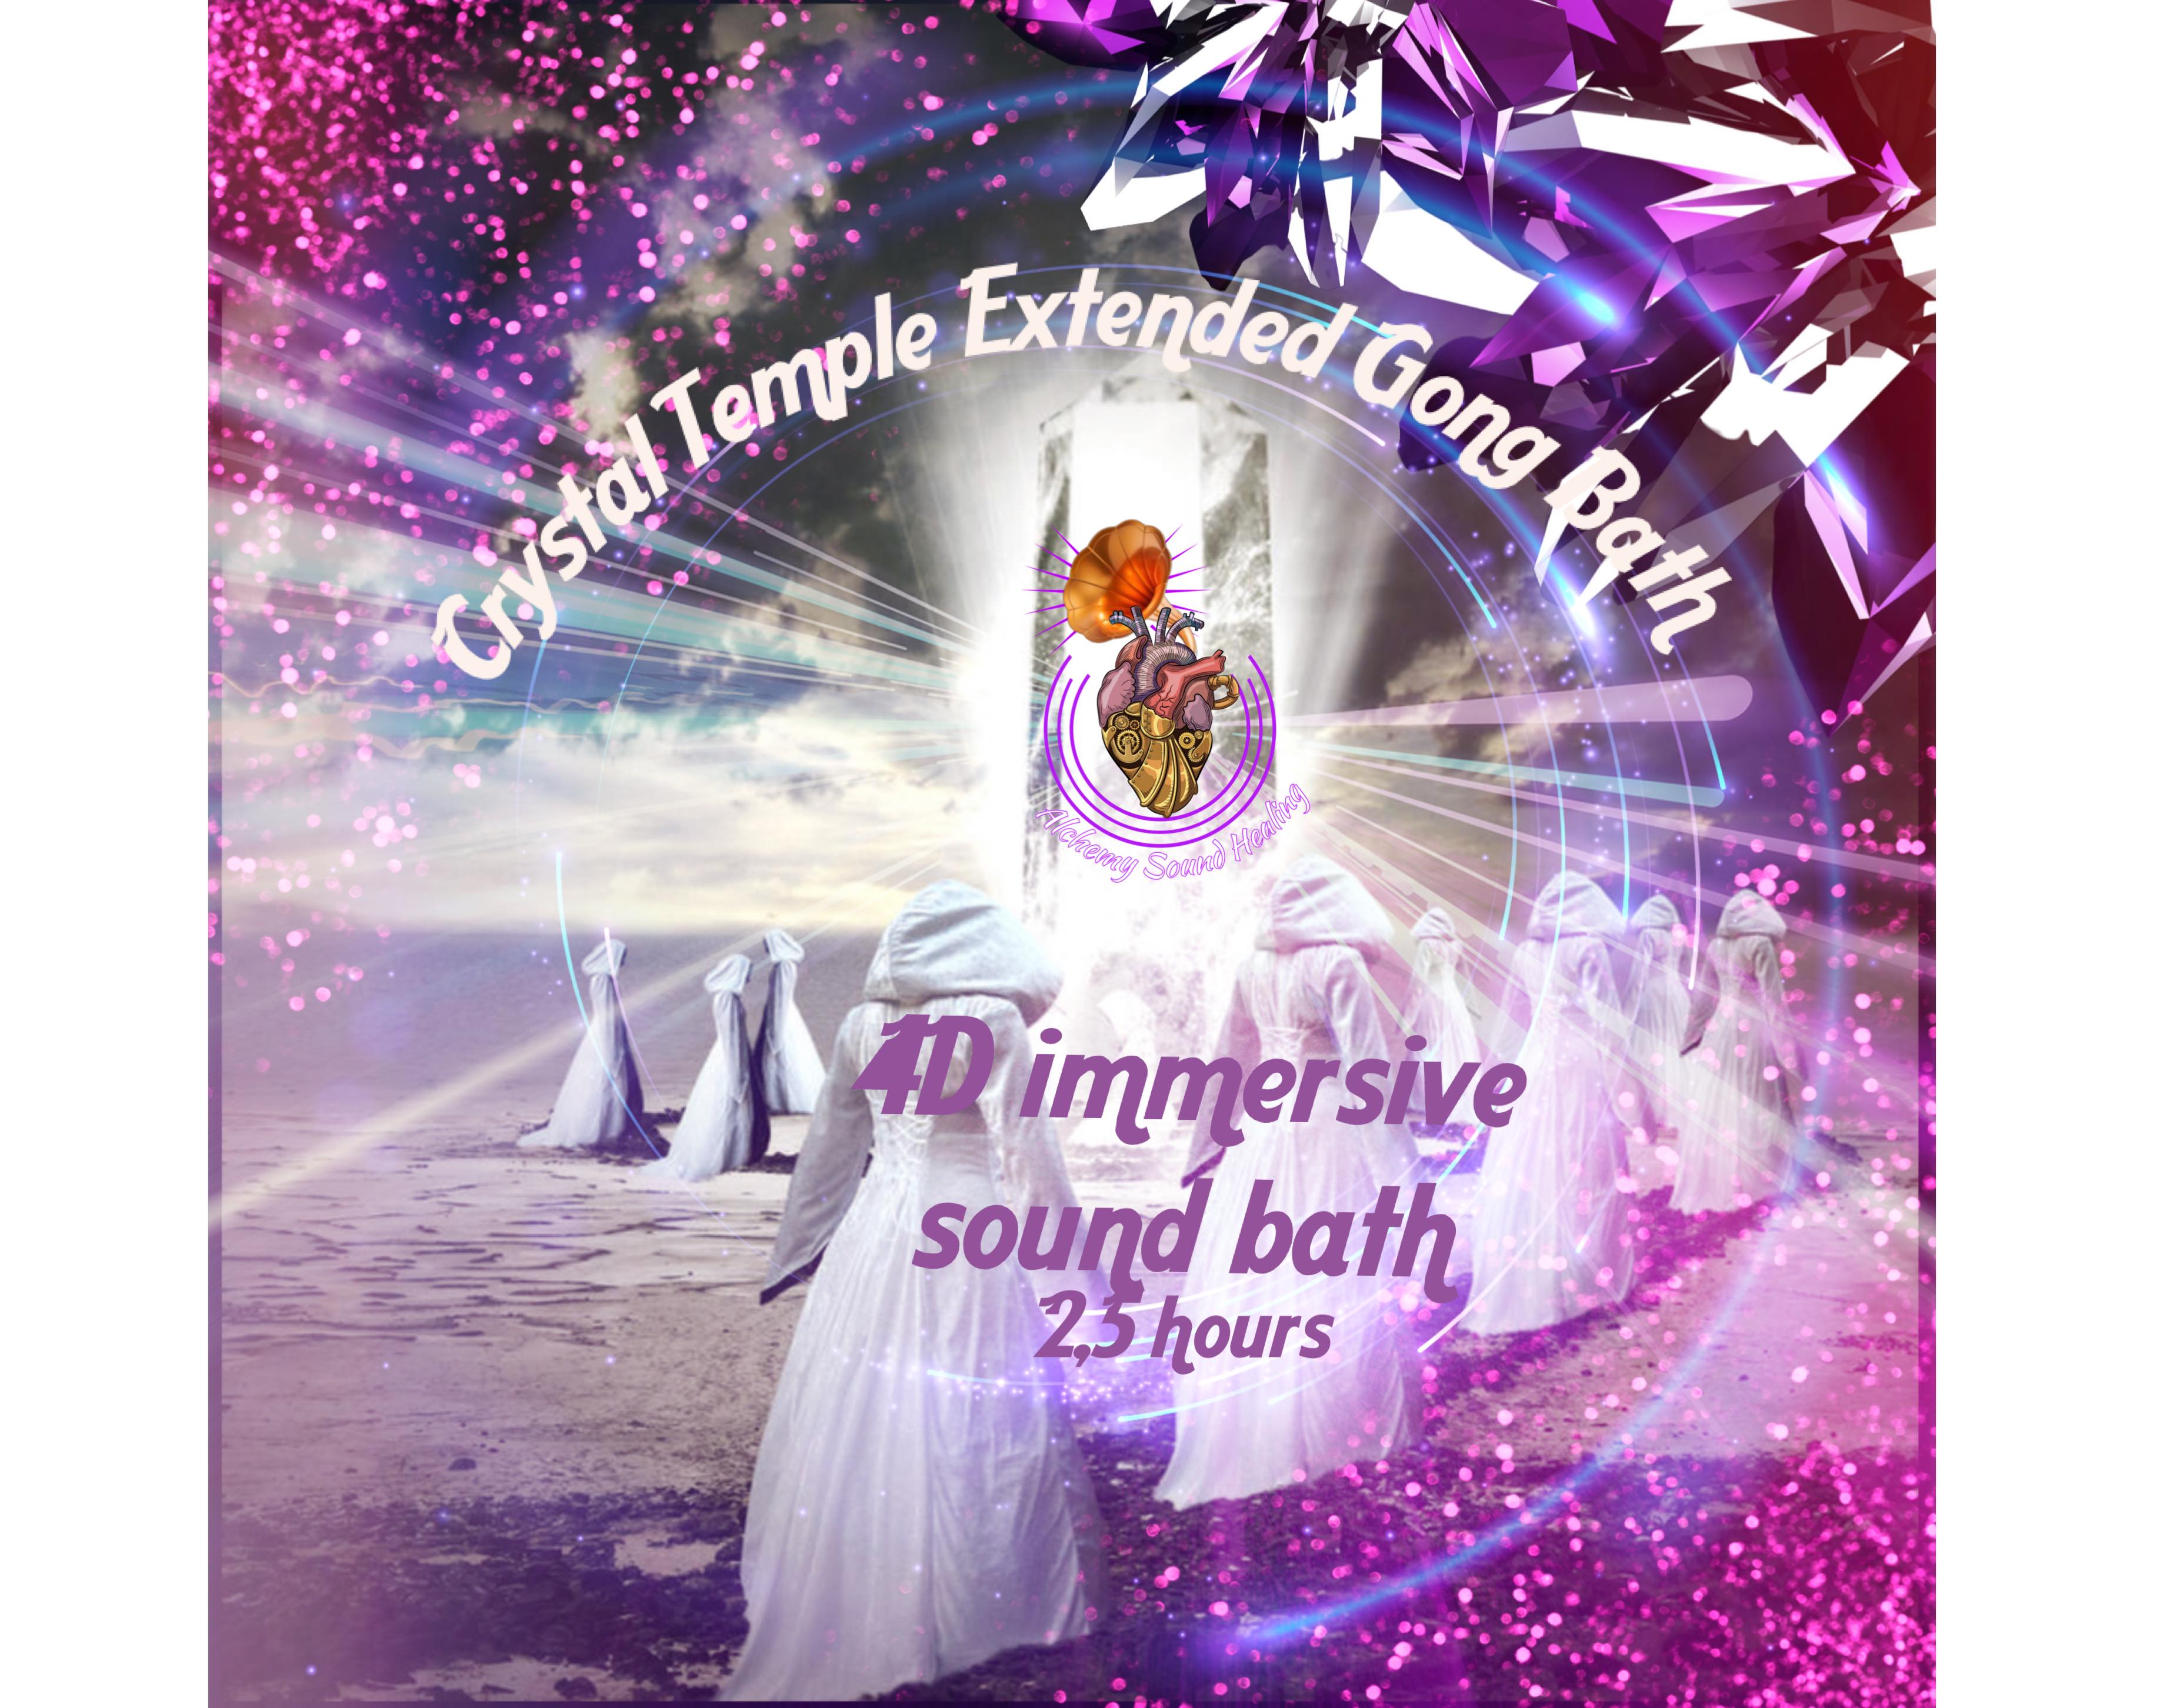 LONDON - CRYSTAL TEMPLE EXTENDED GONG BATH 4D INSTALLATION /150MINUTES FREE CRYS